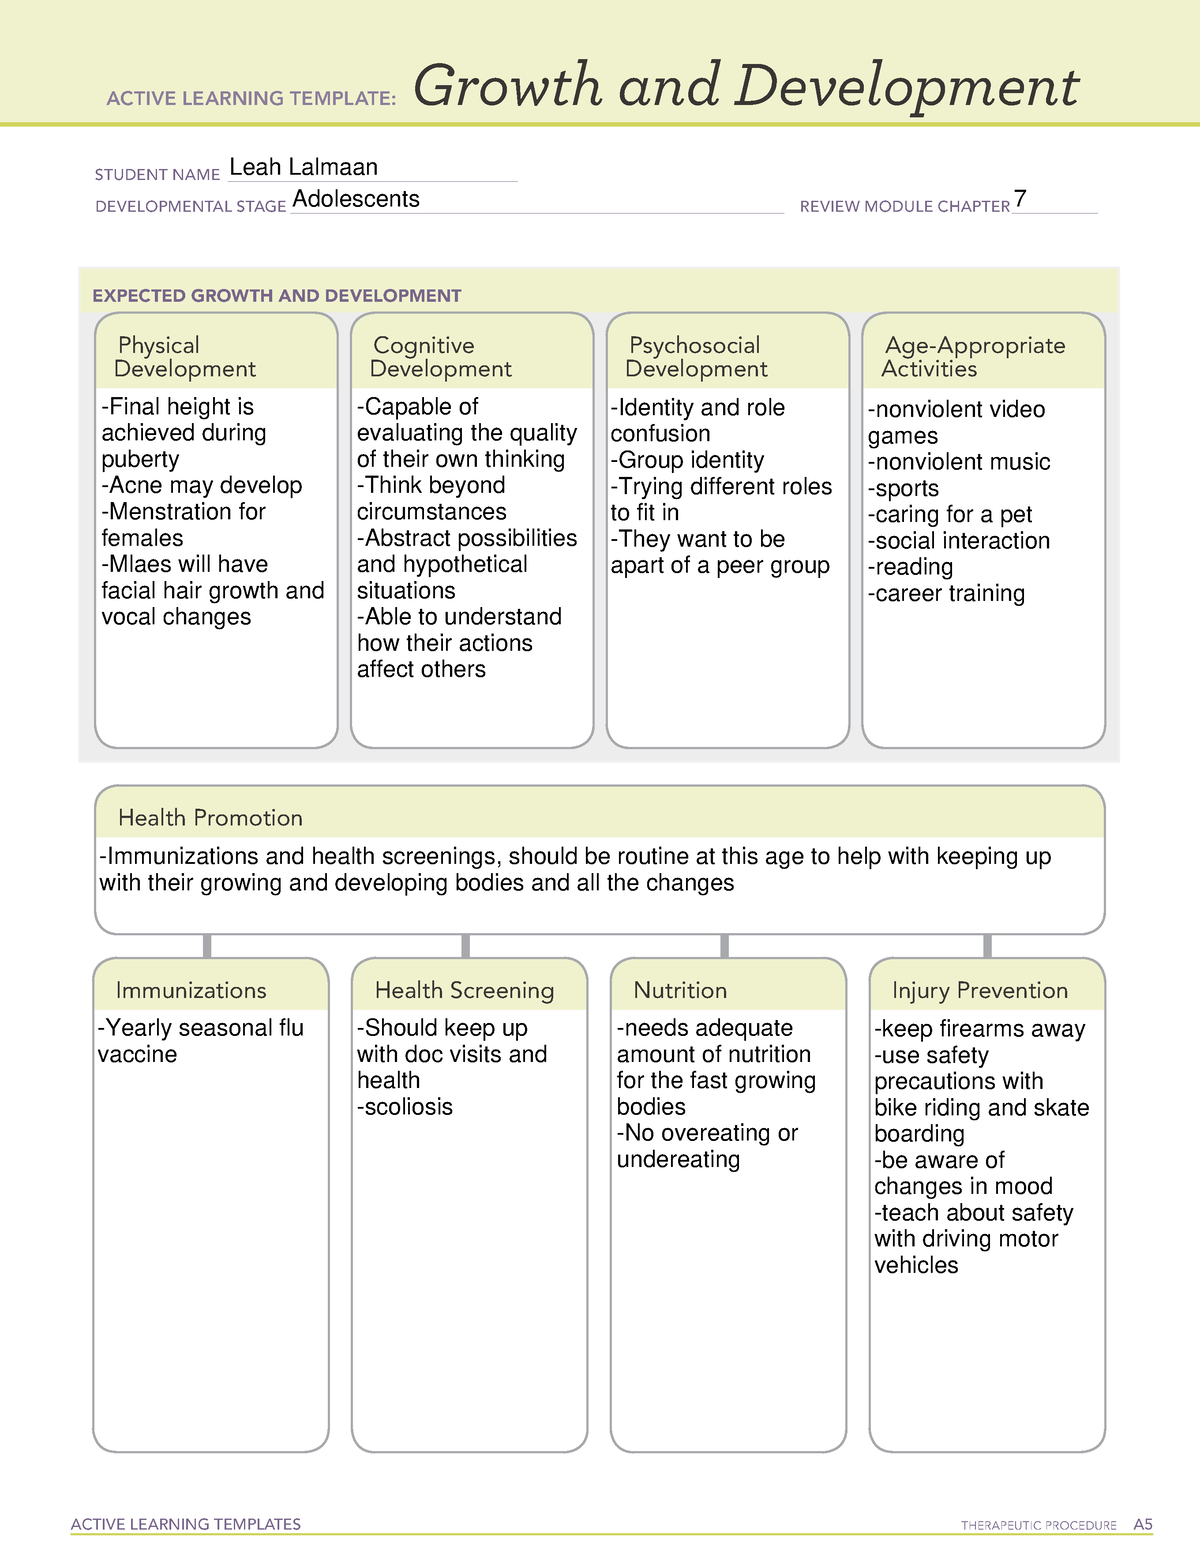 adolescents-growth-and-development-ati-active-learning-templates